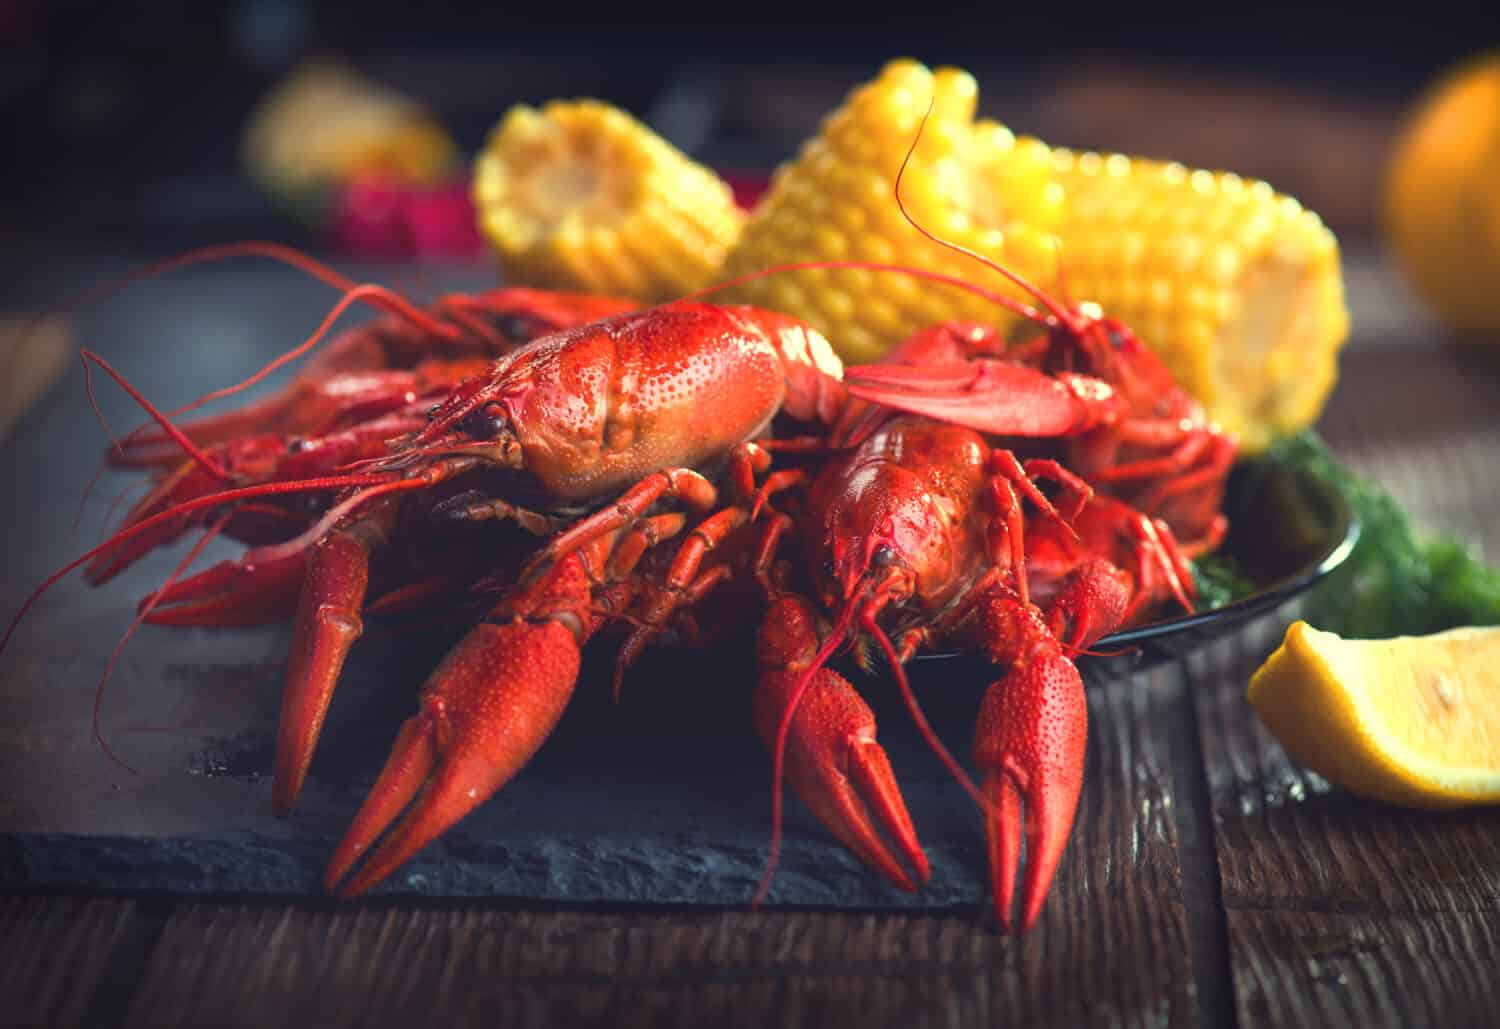 Crawfish, Crayfish Boil Close-up. Creole style crawfish boil serving with corn and potato